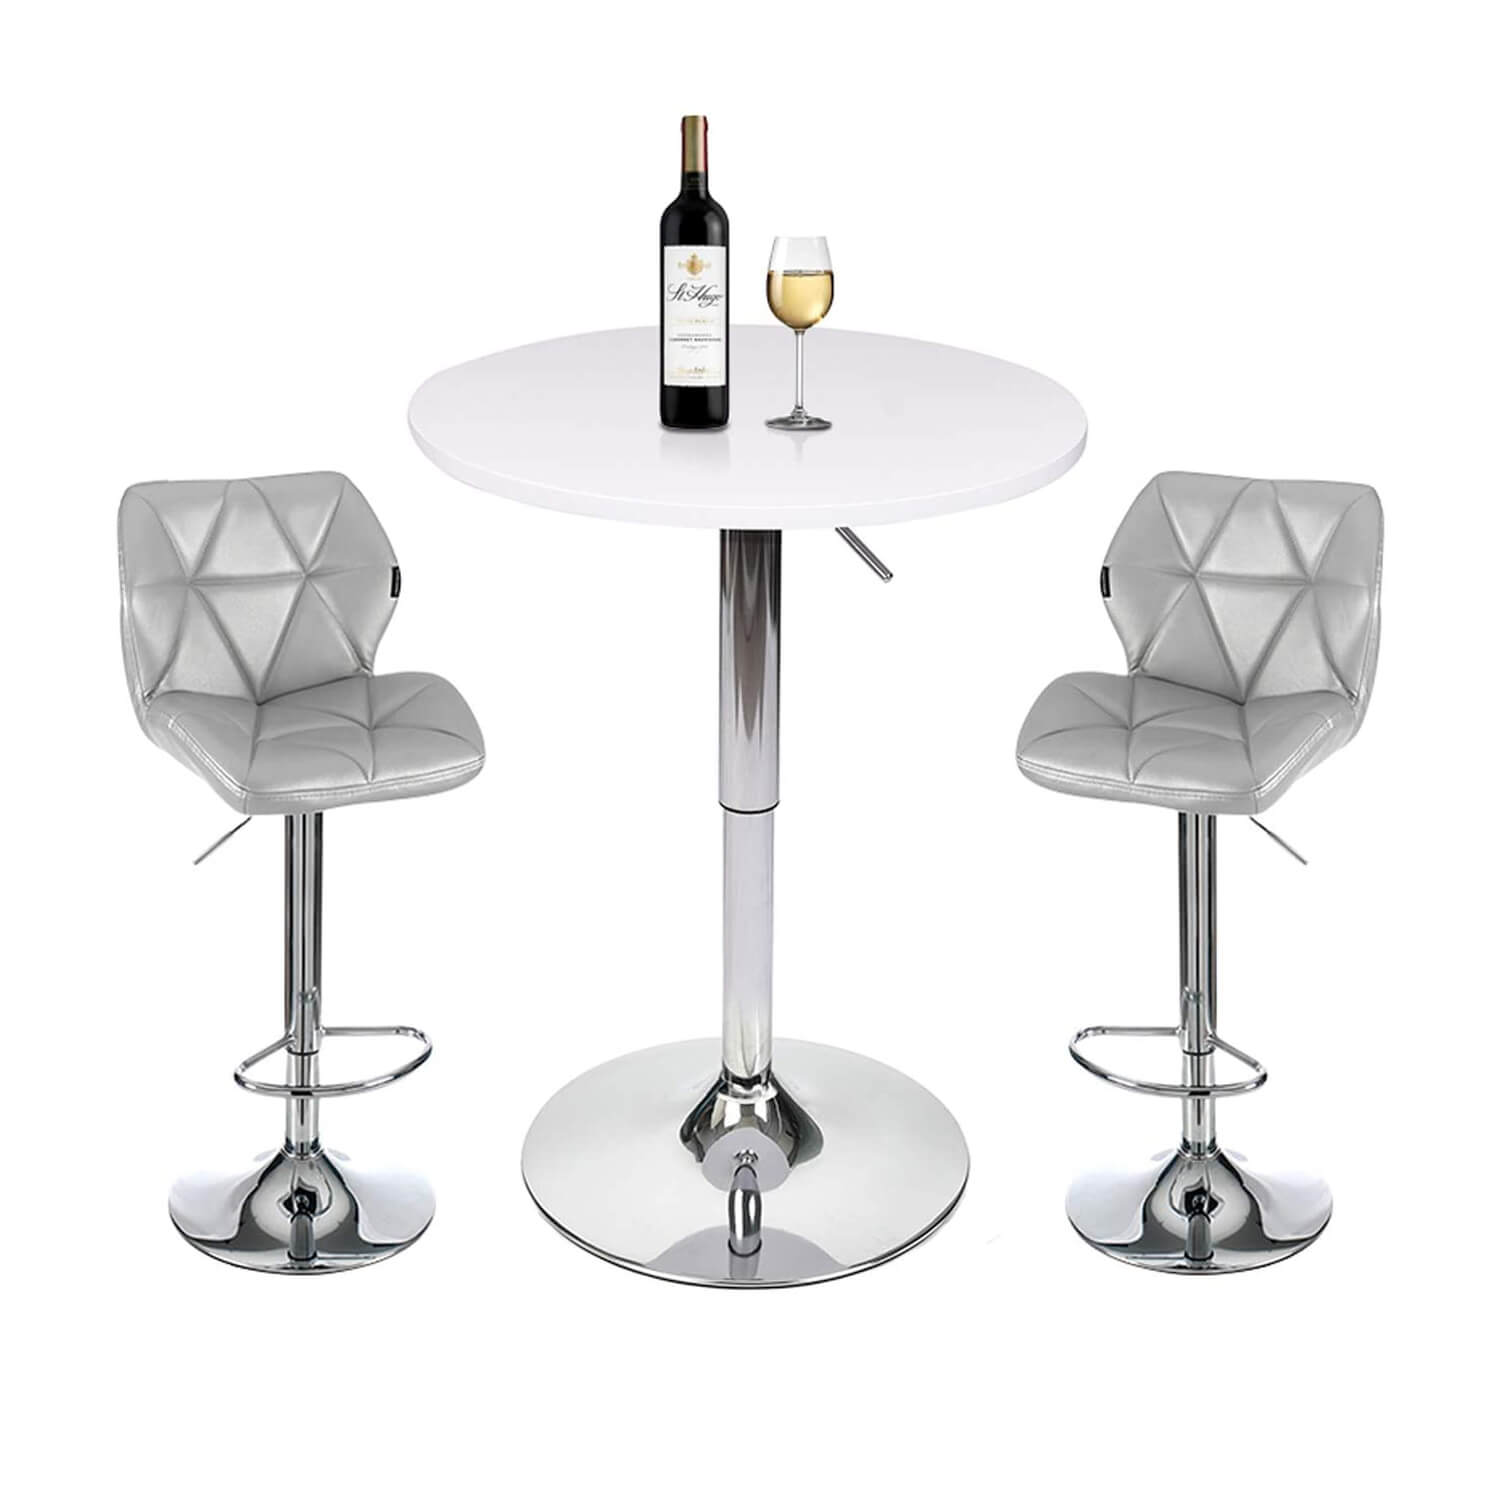 Elecwish Bar Table Set 3-Piece OW0301 white bar table with silver bar stools